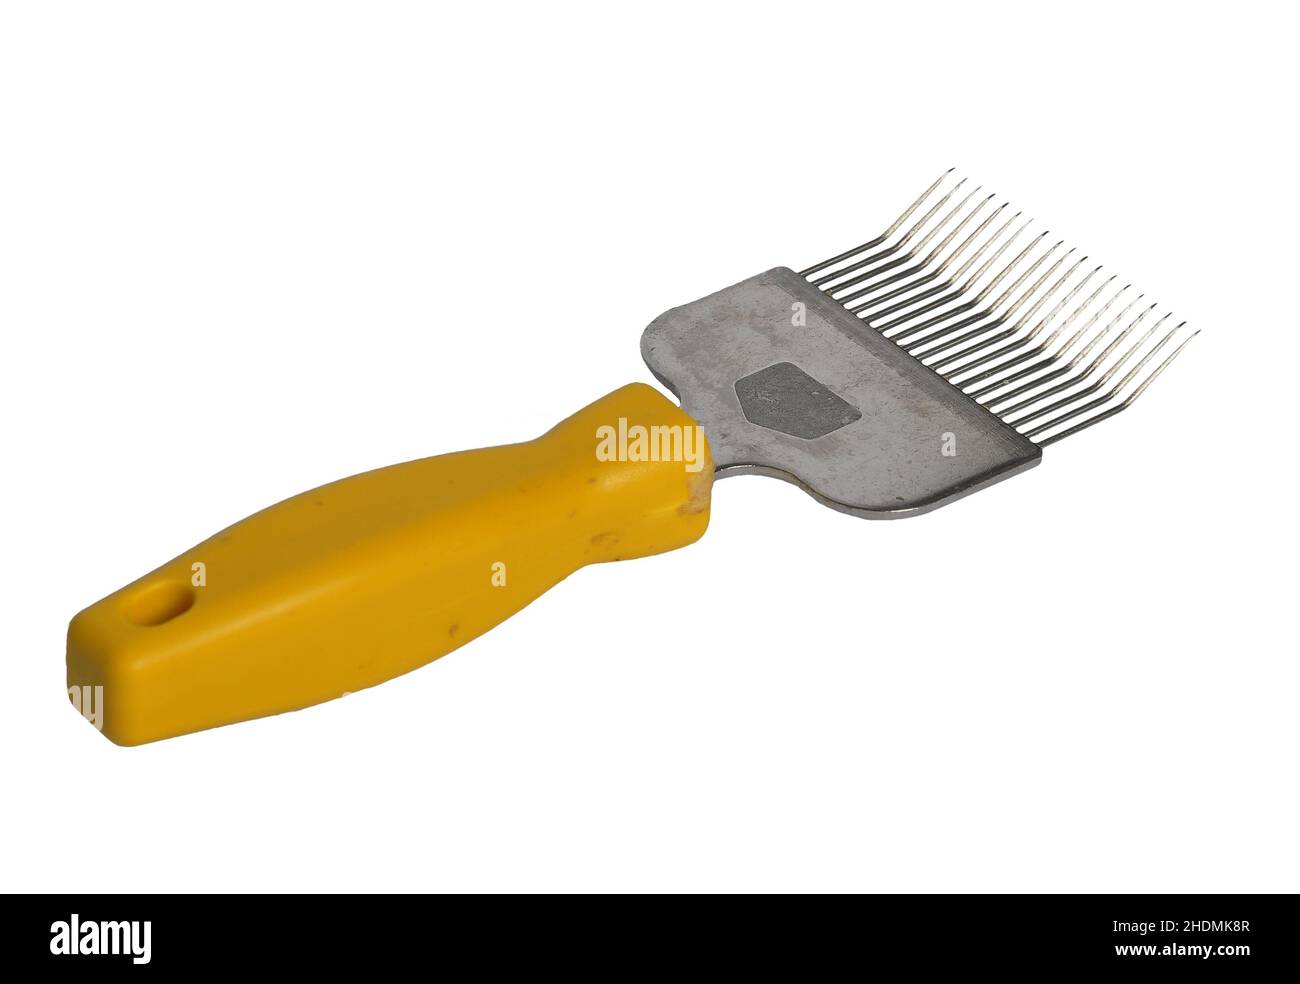 Beekeeping equipment, uncapping knive Stock Photo